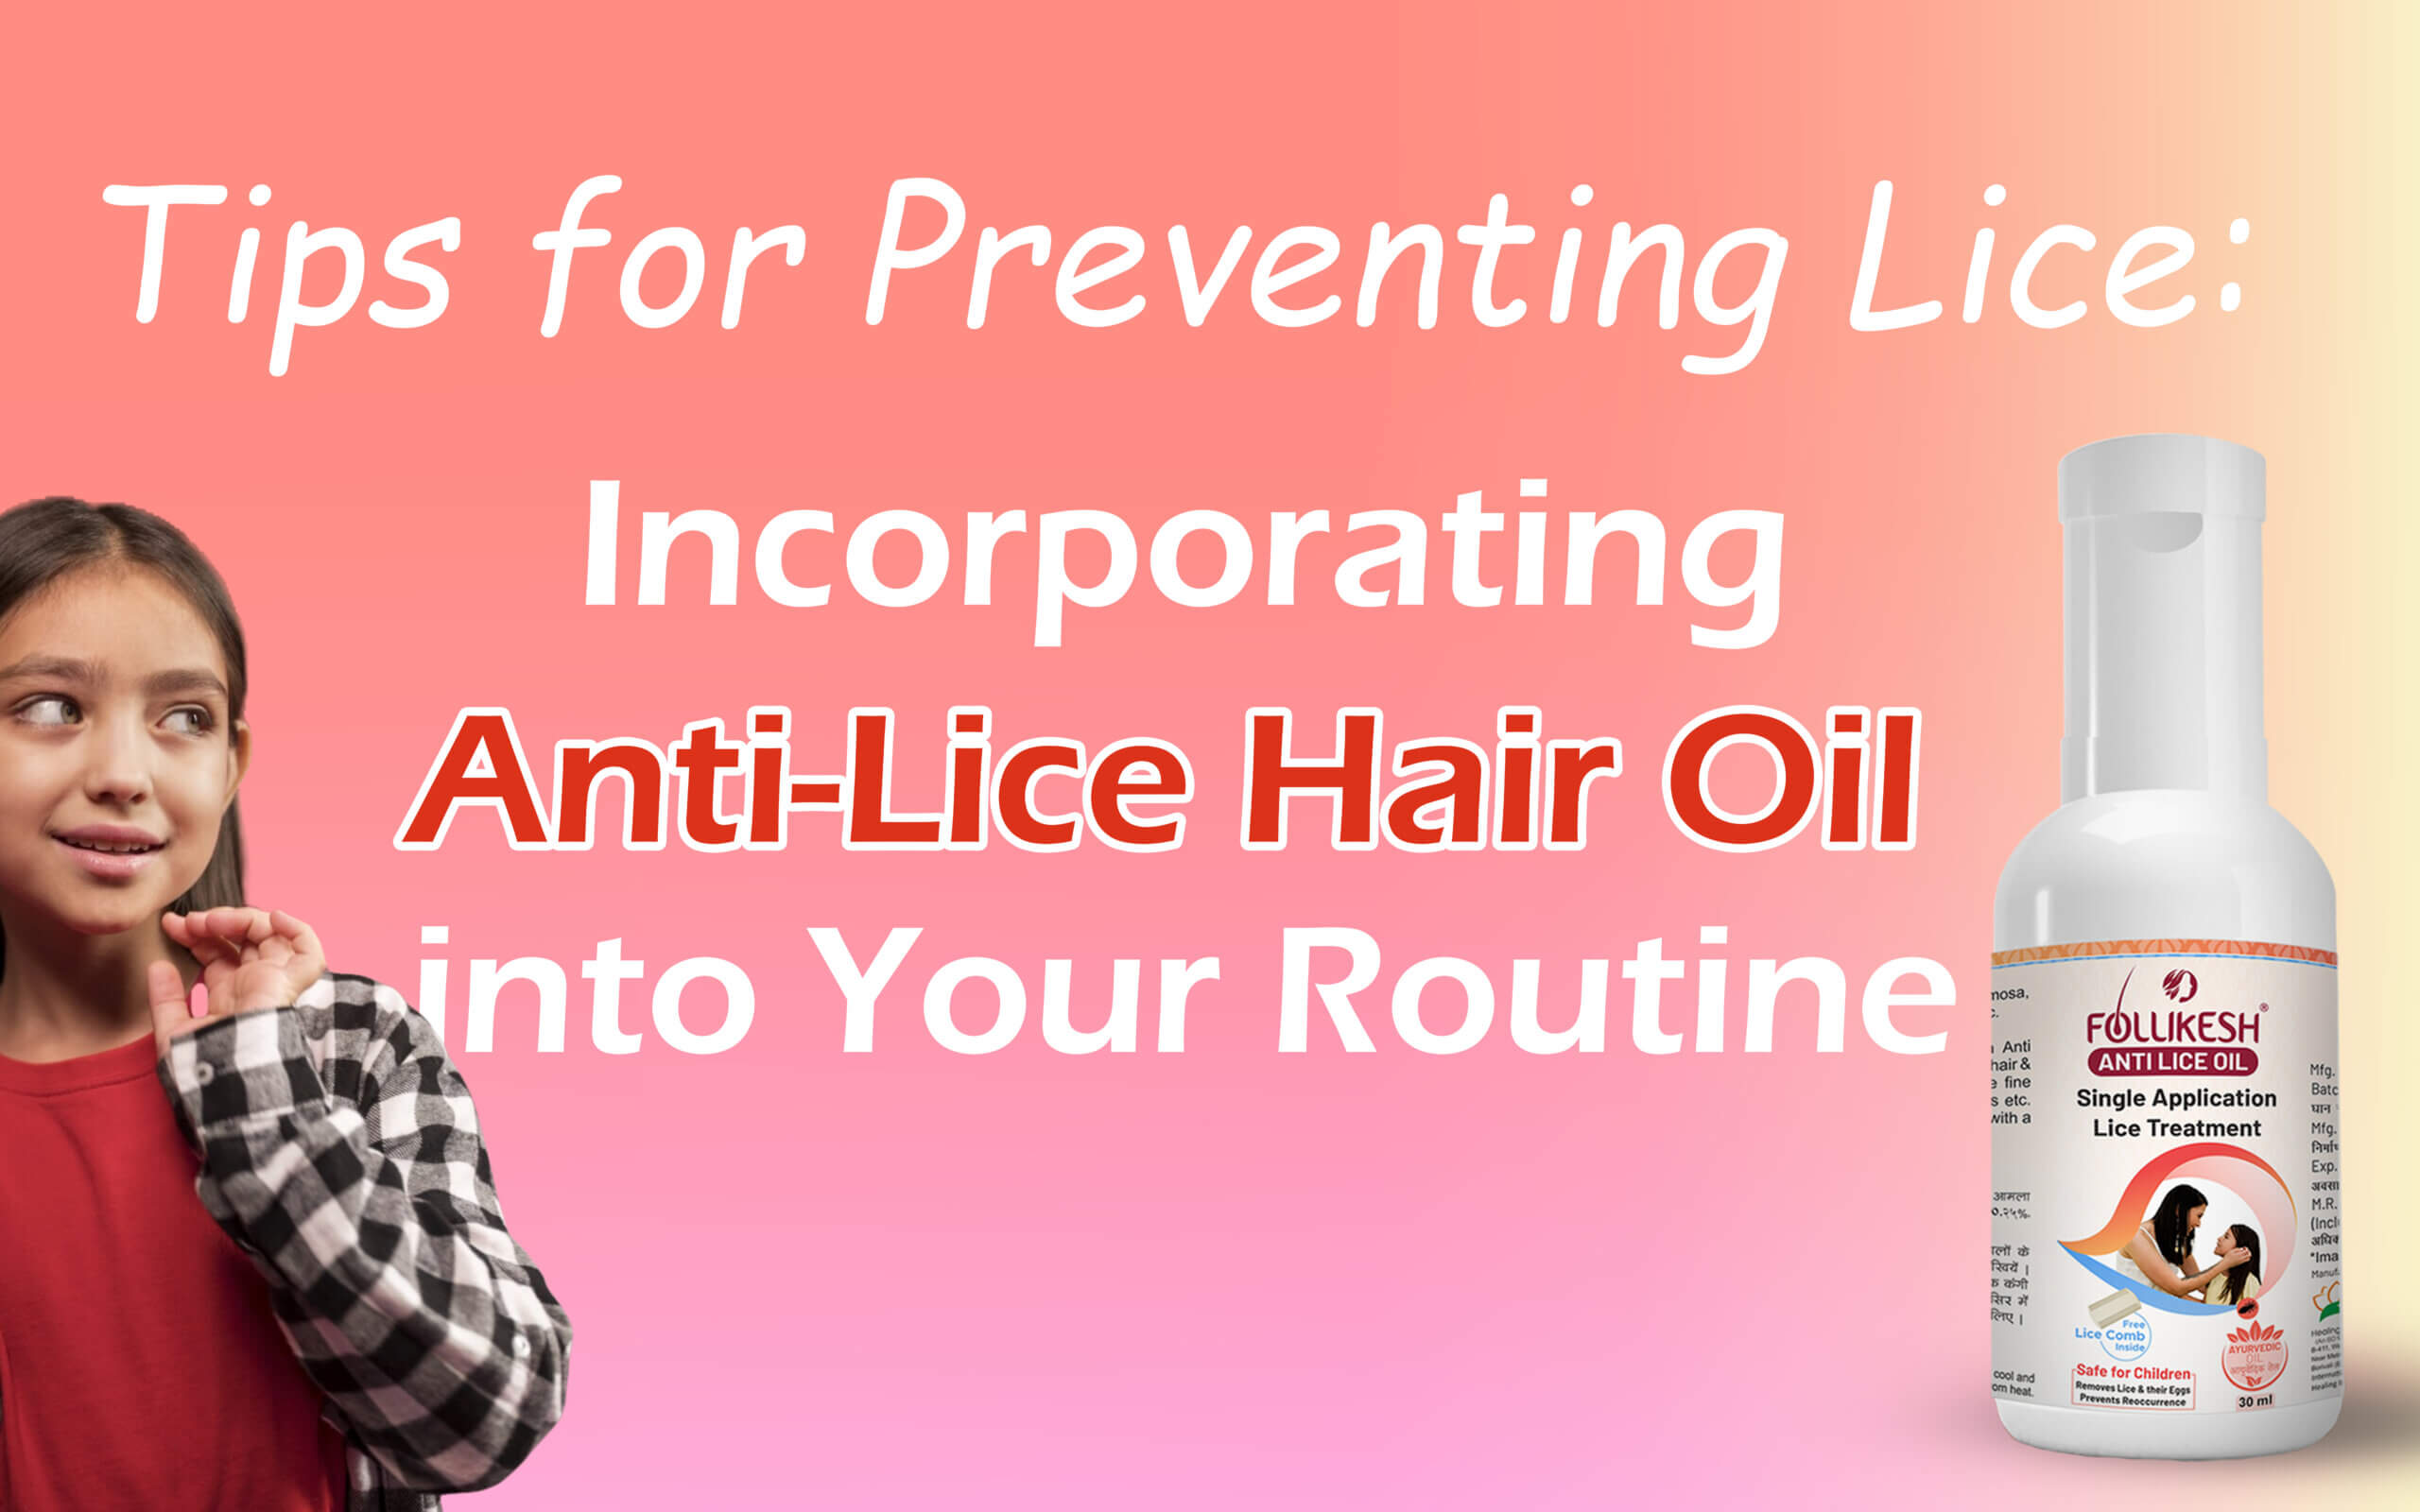 Anti-Lice Hair Oil into Your Routine